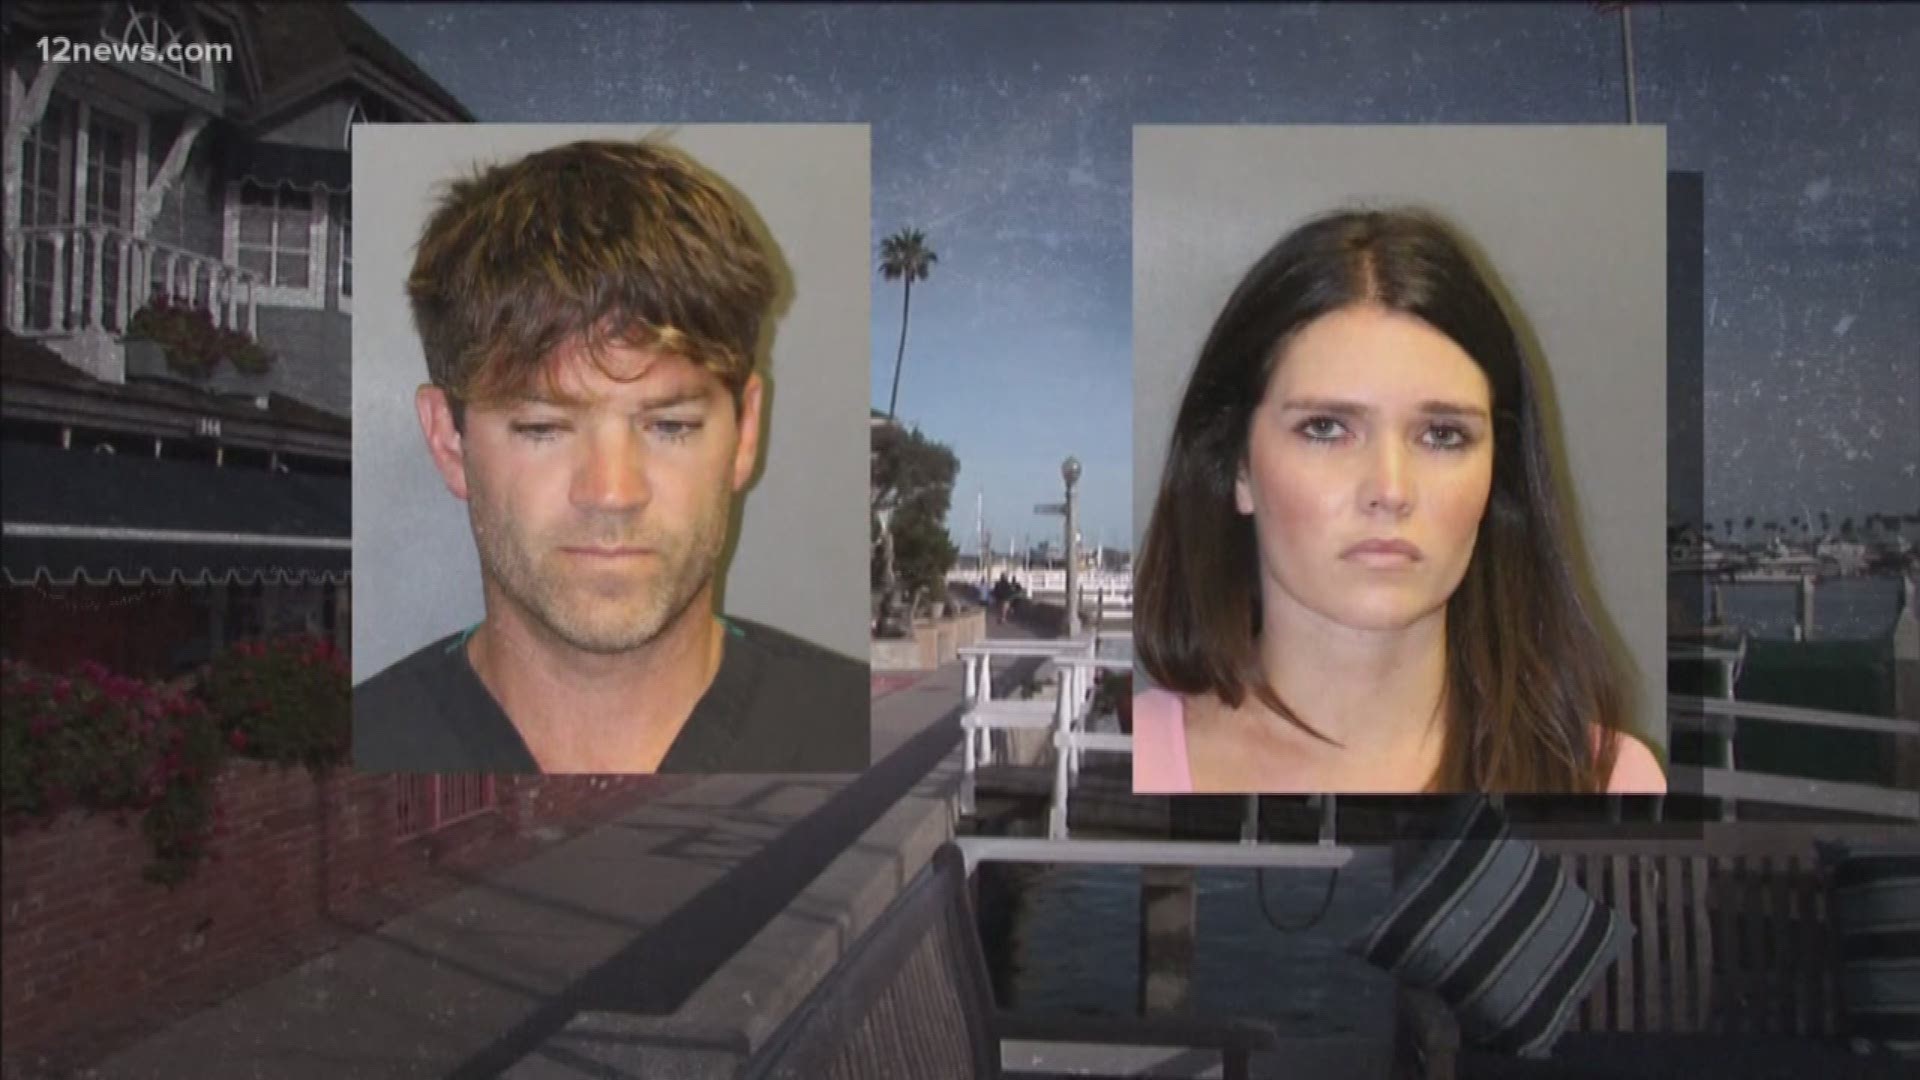 A reality TV star surgeon and his girlfriend are accused of sexually taking advantage of unsuspecting women. Police in Orange County say there could be victims outside California.